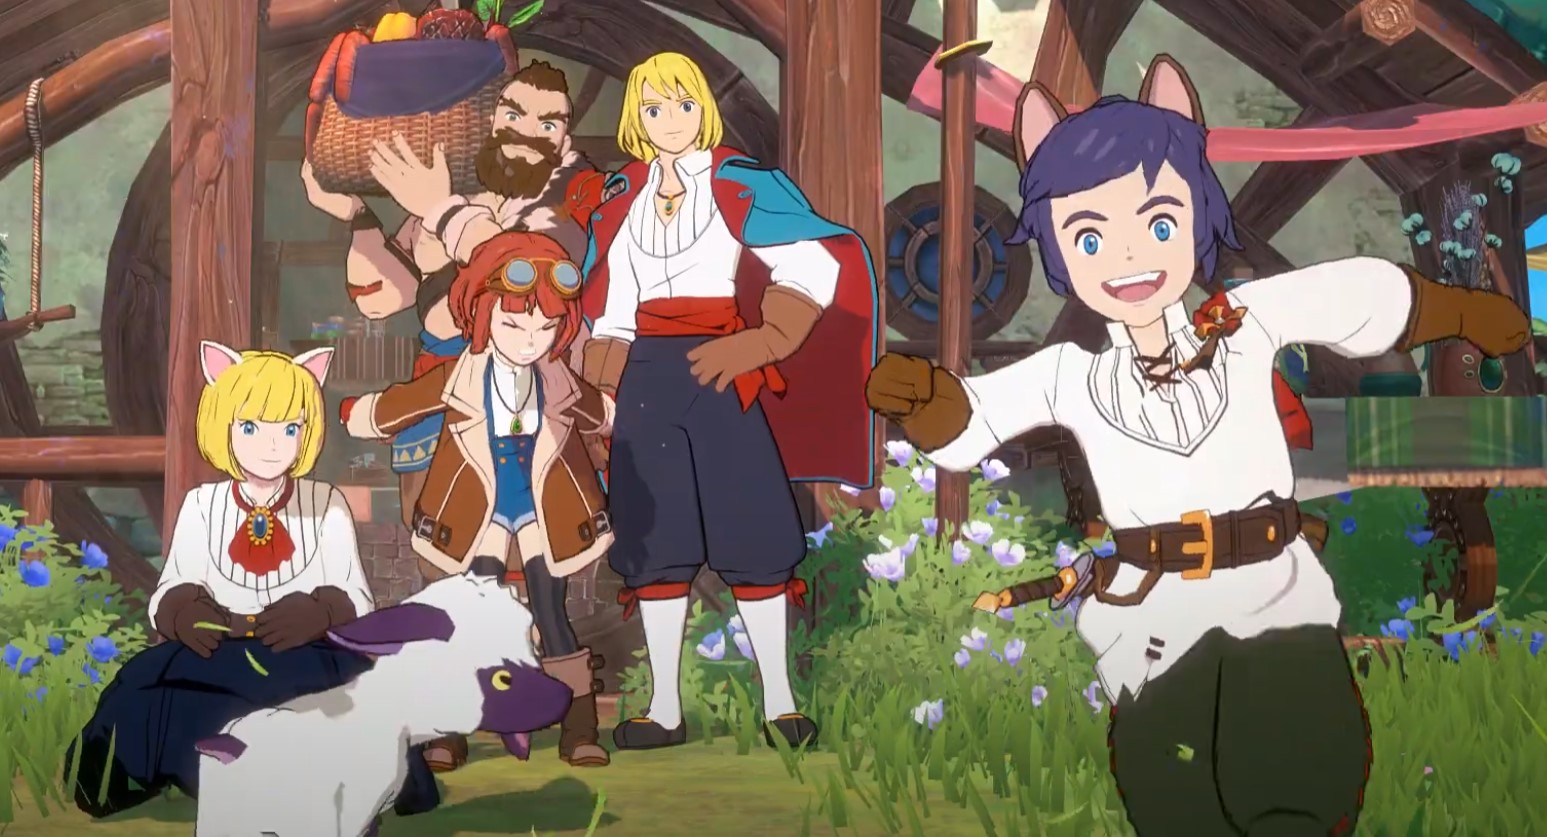 New Ni No Kuni MMORPG for mobile makes $100 million in 11 days